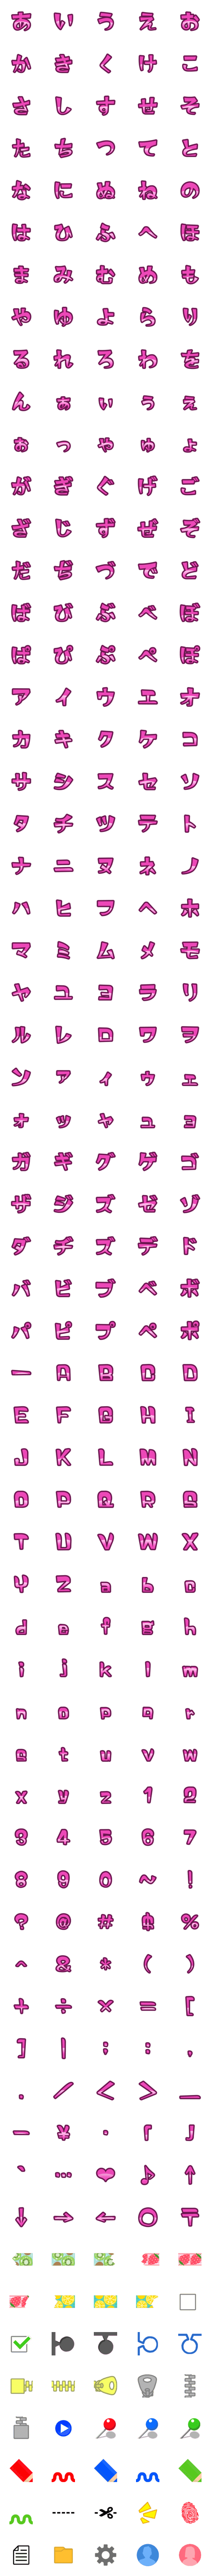 [LINE絵文字]デコレーション絵文字の画像一覧